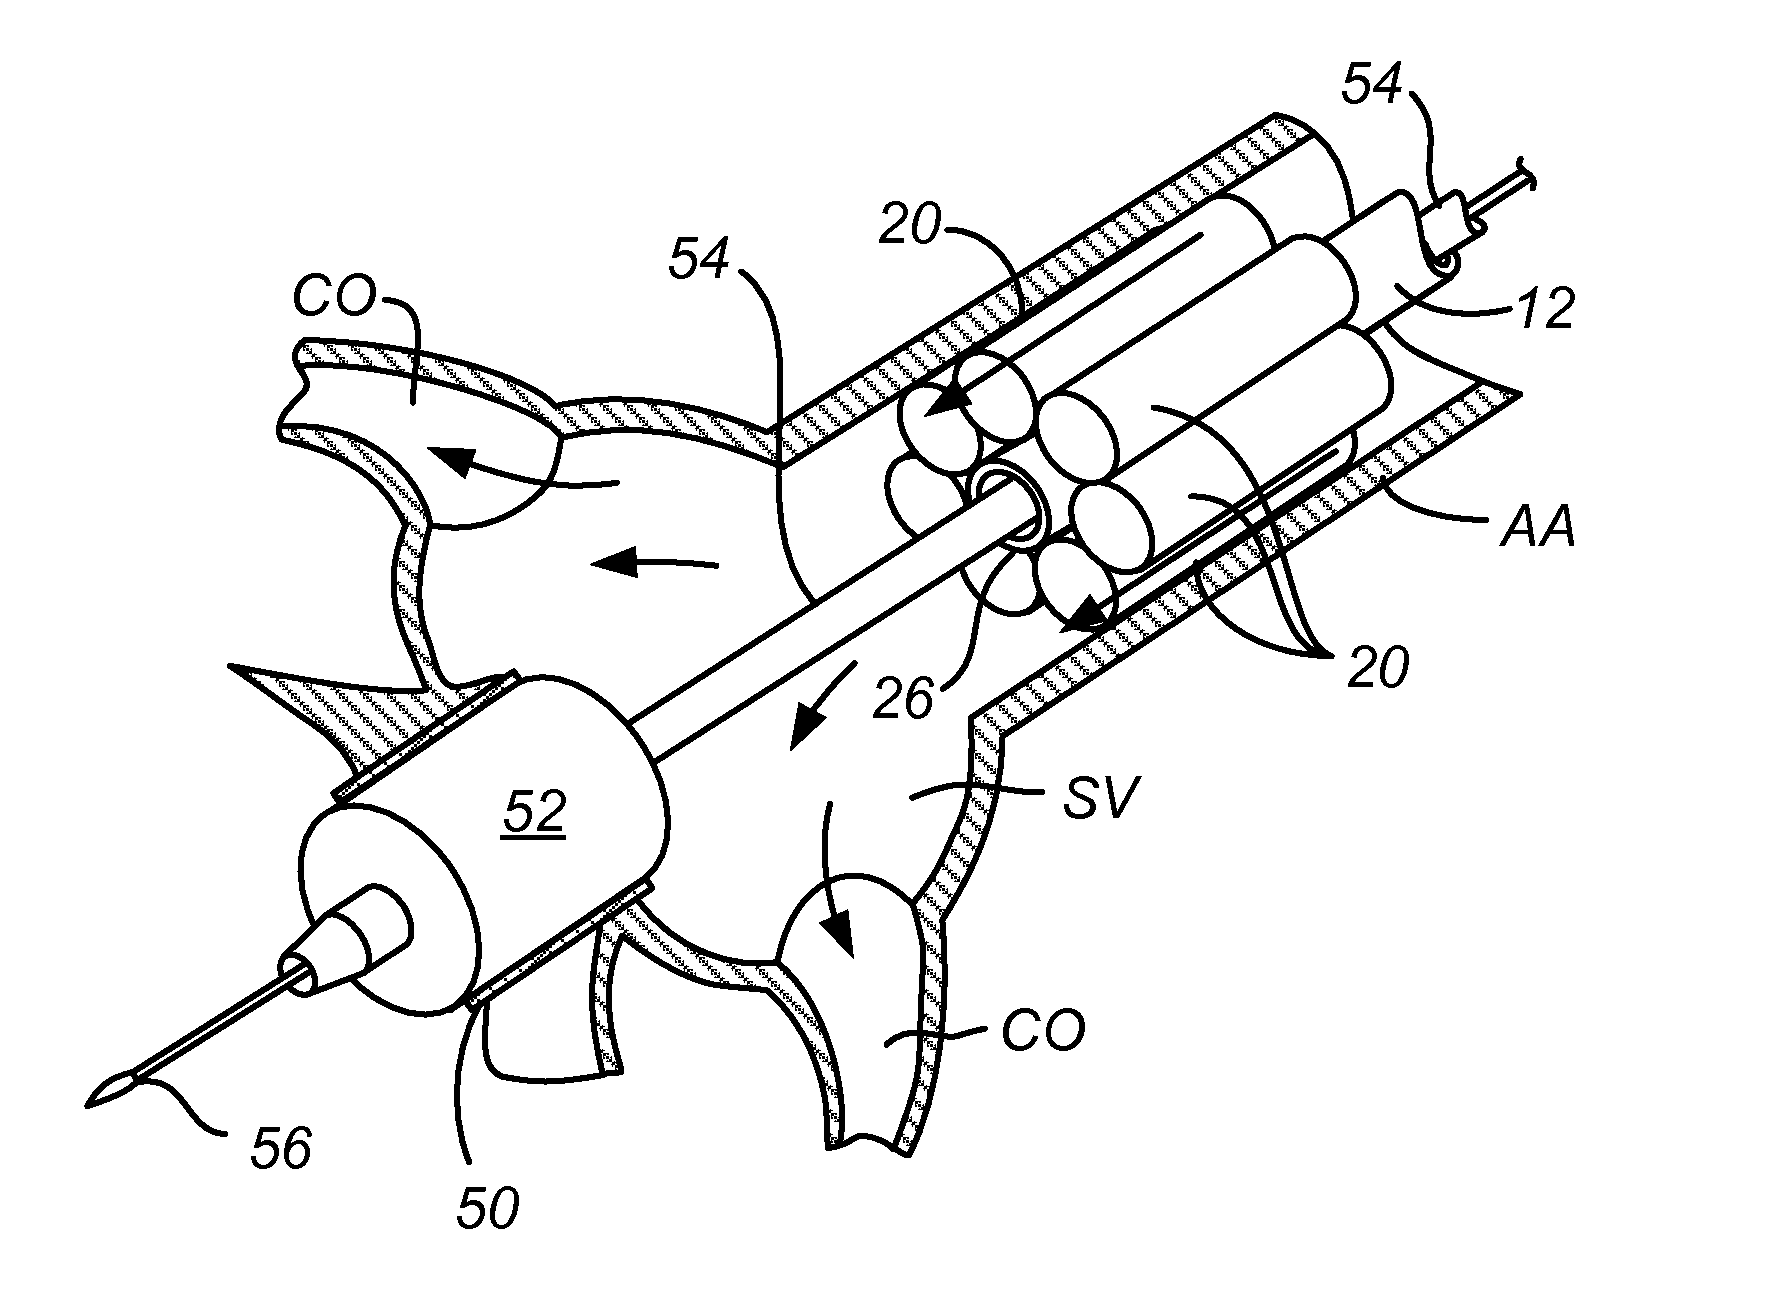 Method and system for balloon counterpulsation during aortic valve replacement